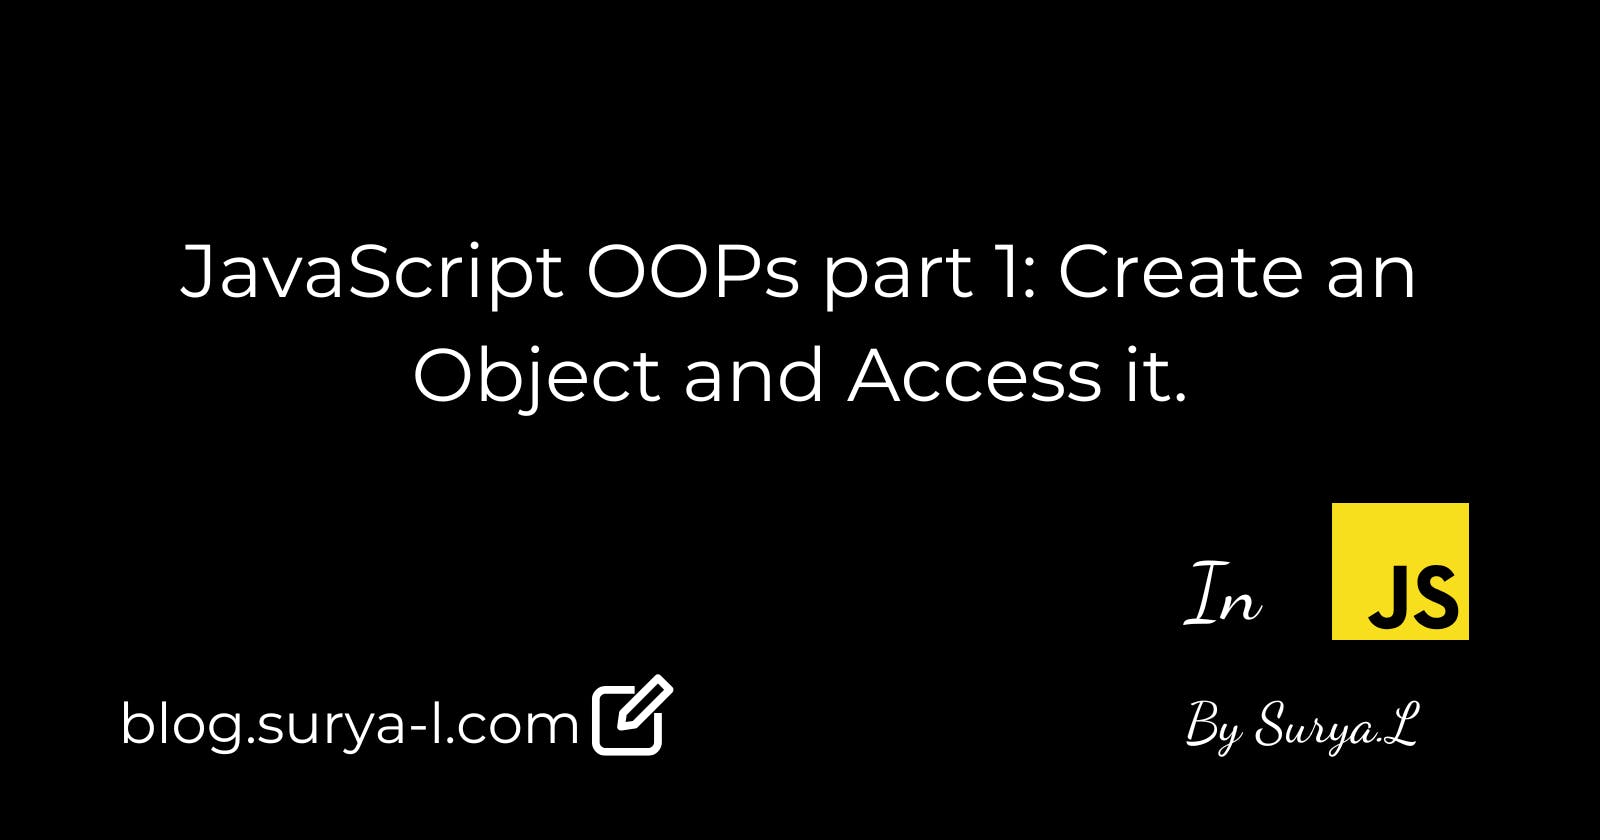 JavaScript OOP's part 1: Create an Object and Access it.